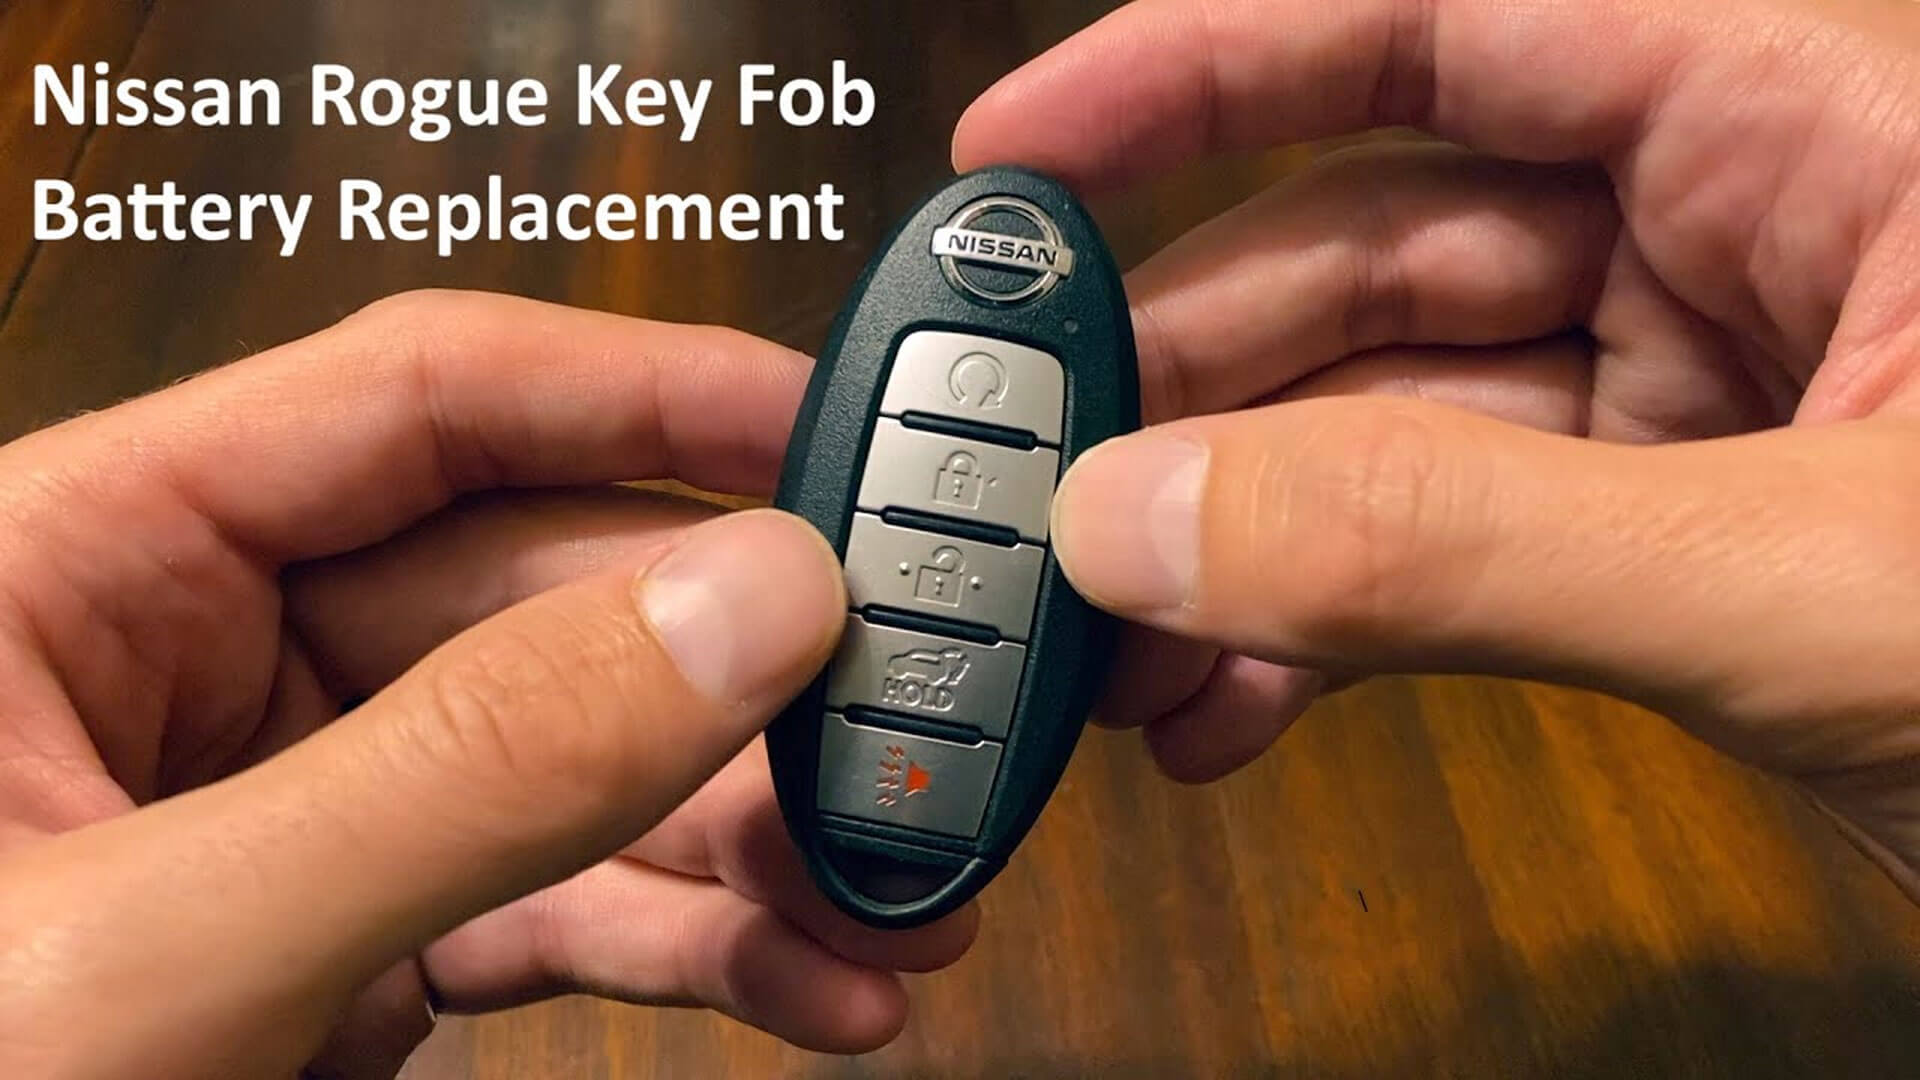 How to Replace a Battery For a Nissan Key Fob